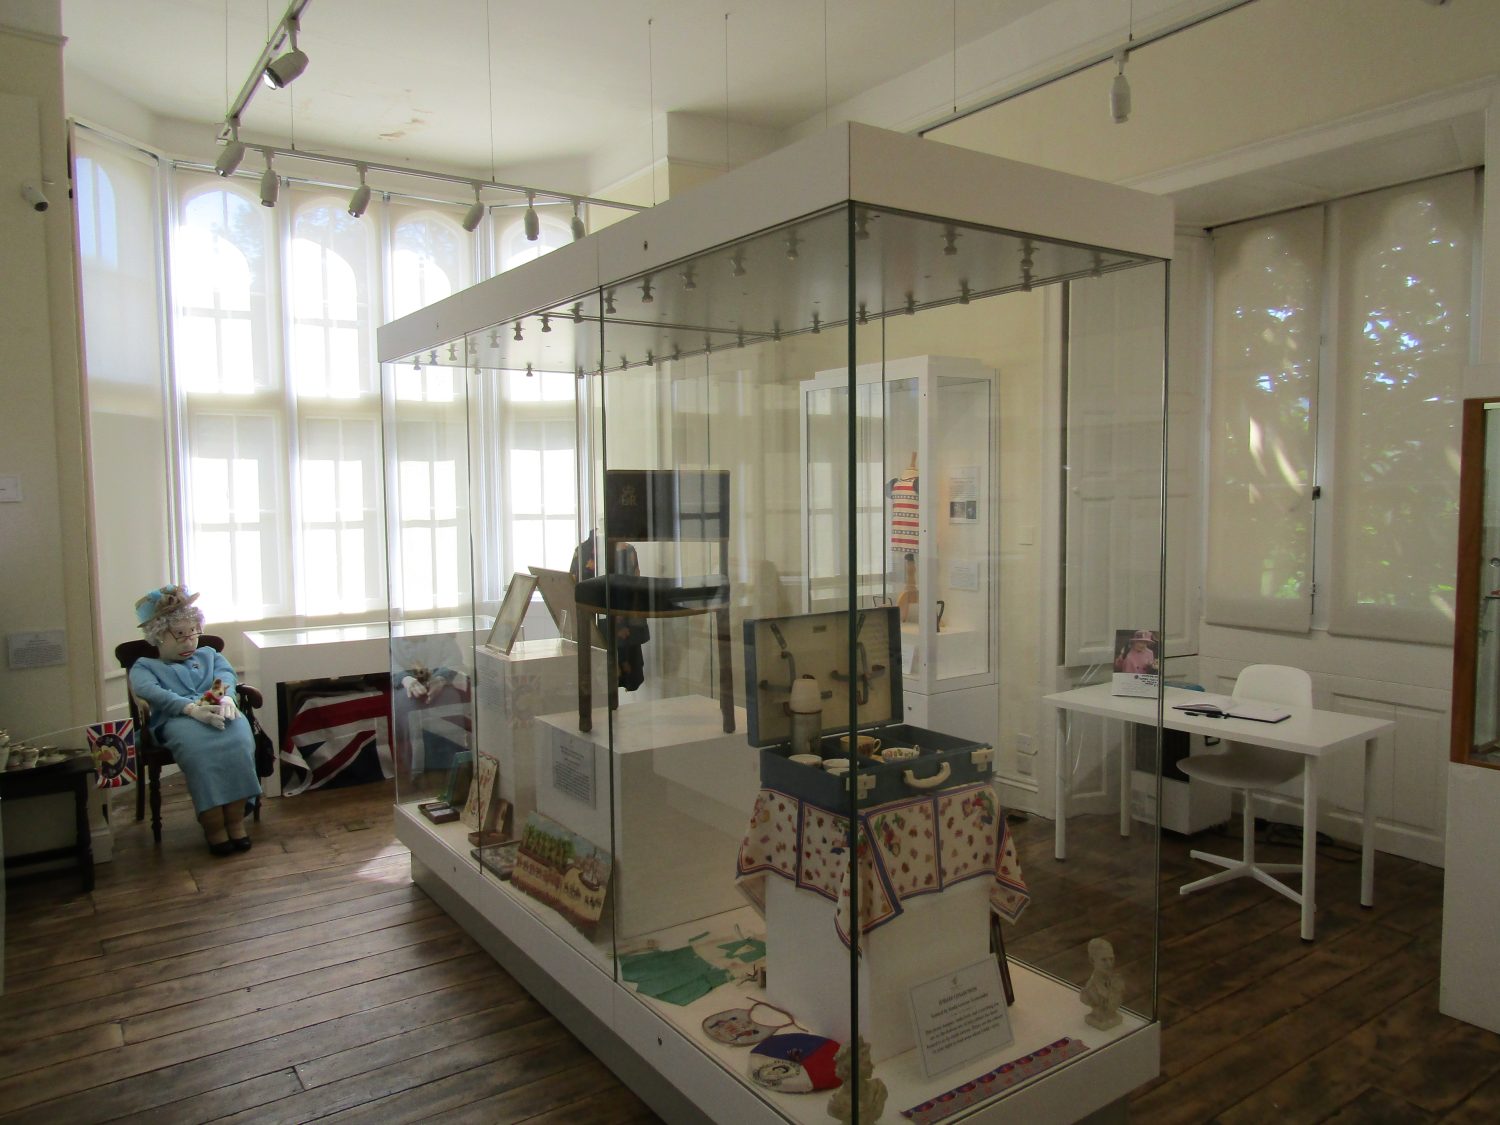 The People's Jubilee Exhibition